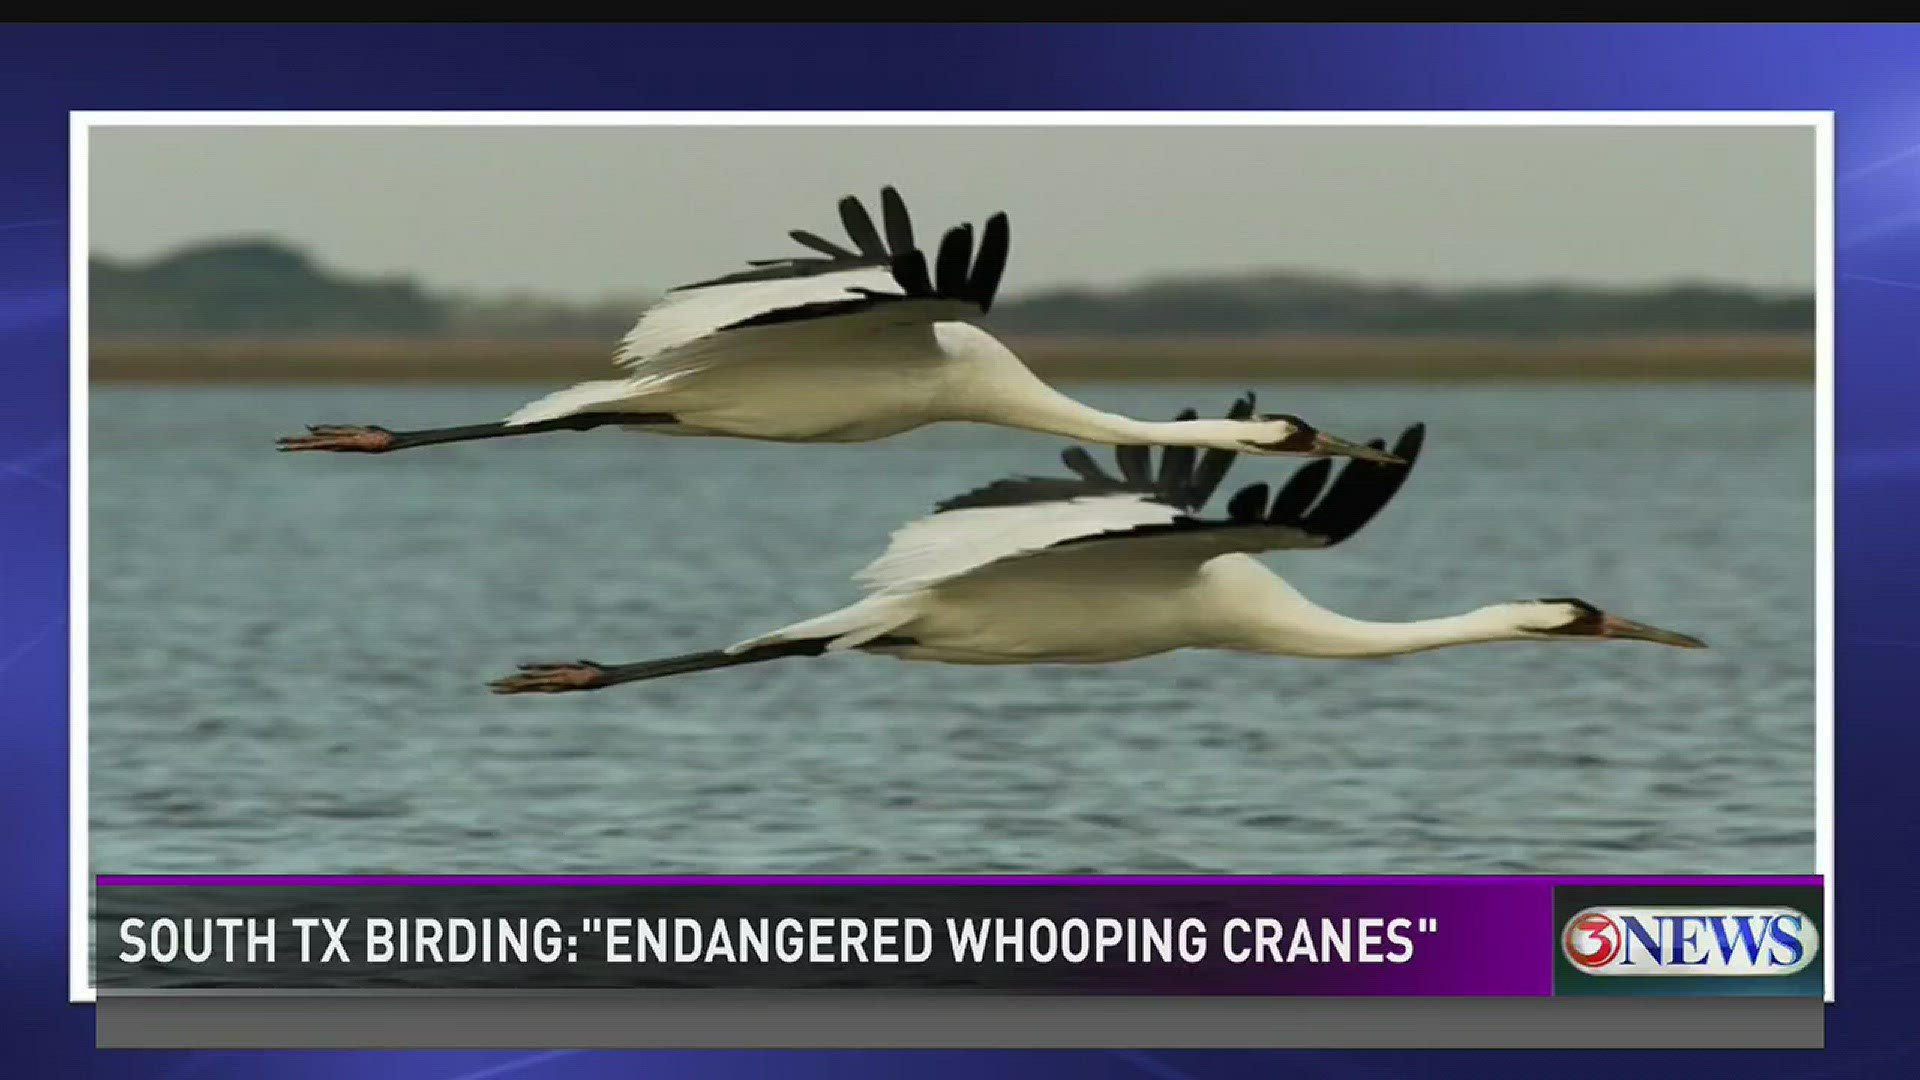 In this edition of South Texas Birding, Dr. Liz Smith joined us to talk about the Texas Whooping Crane Program.